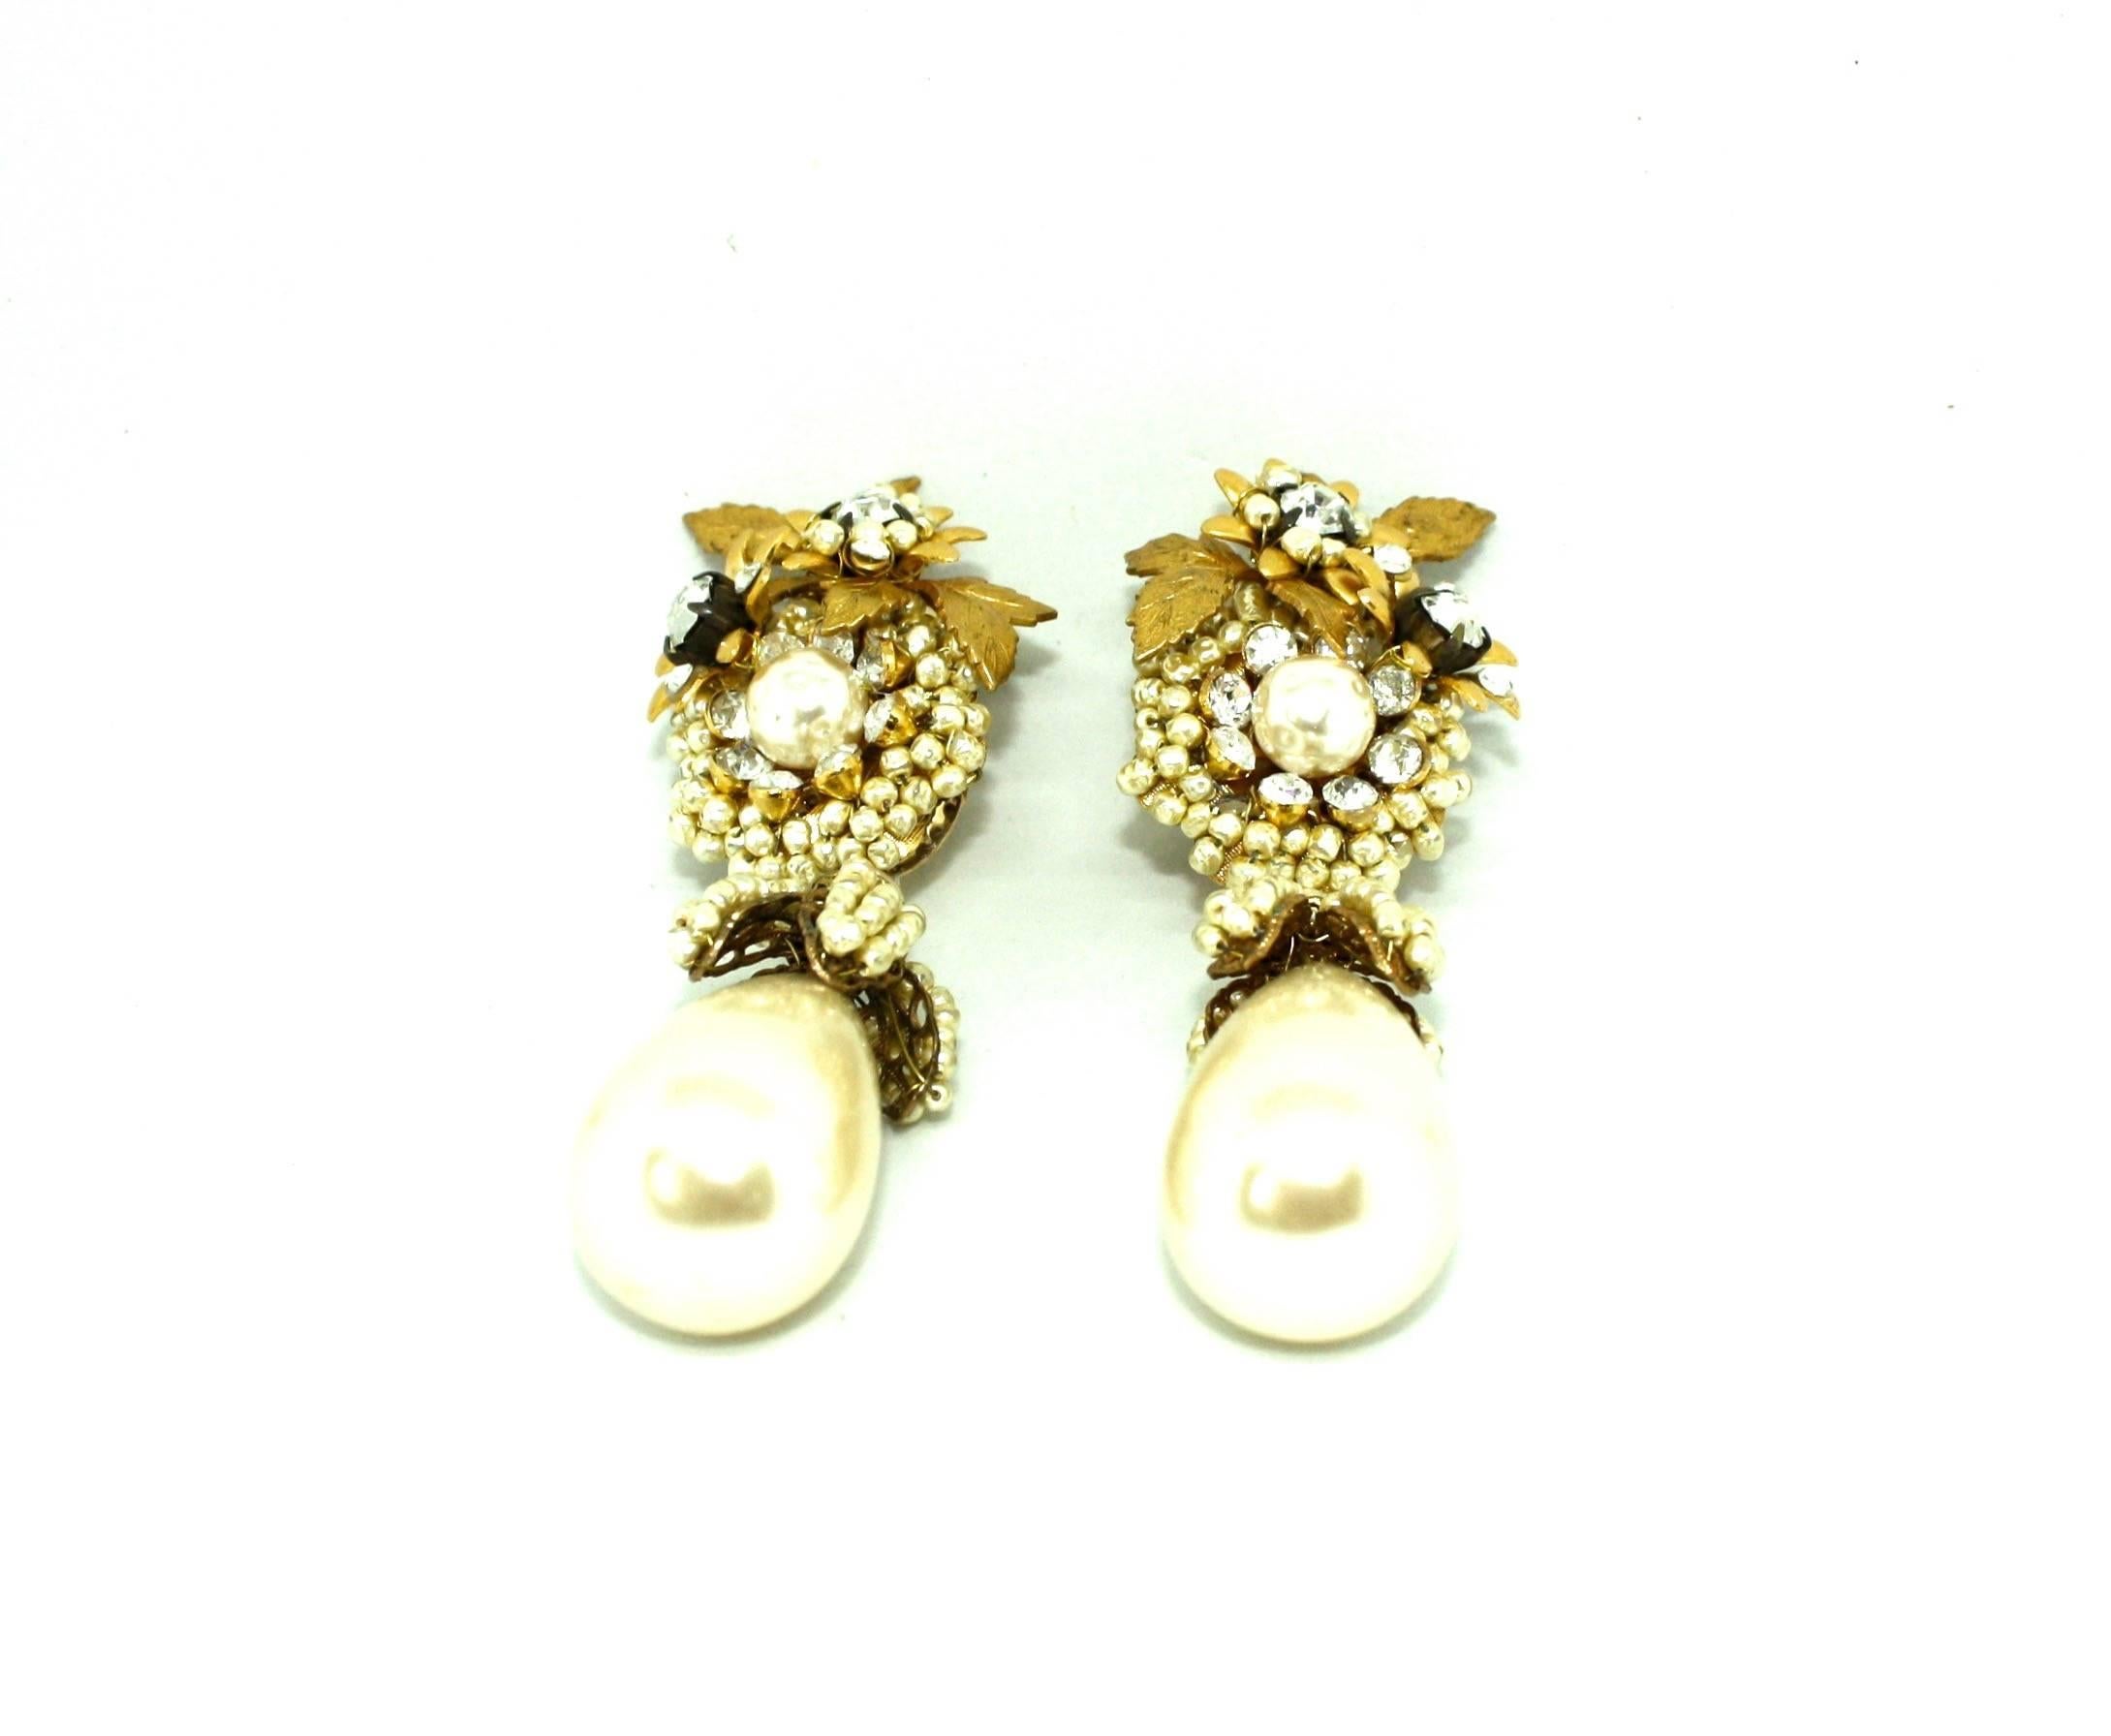 Amazing drop faux pearl clips earrings by former Miriam Haskell designer Larry Vrba. These stunning clip earrings are extremely detailed, adorned with clusters of faux pearls and white diamante stones in a floral theme, ending with a large